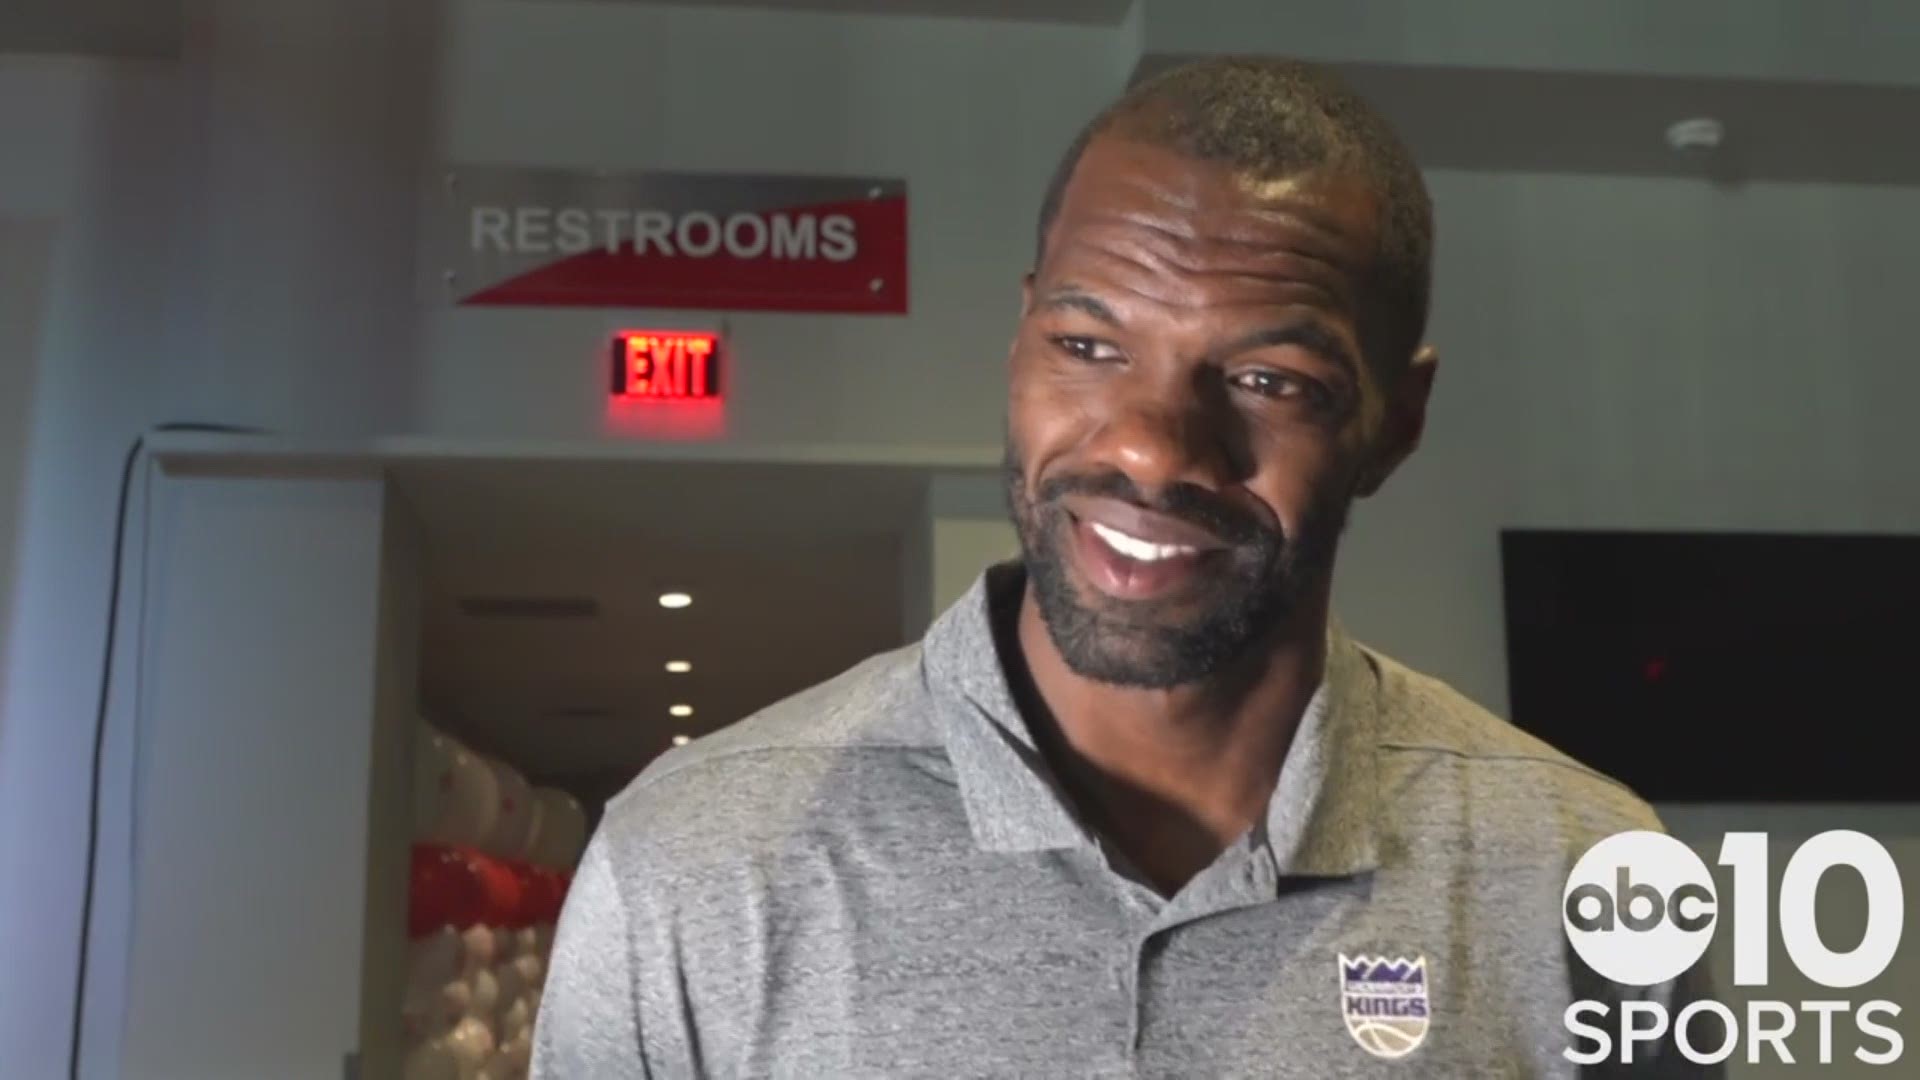 New Kings’ center Dewayne Dedmon discusses his decision to join Sacramento, the energy he provides the roster and why he fits the team's style of play.